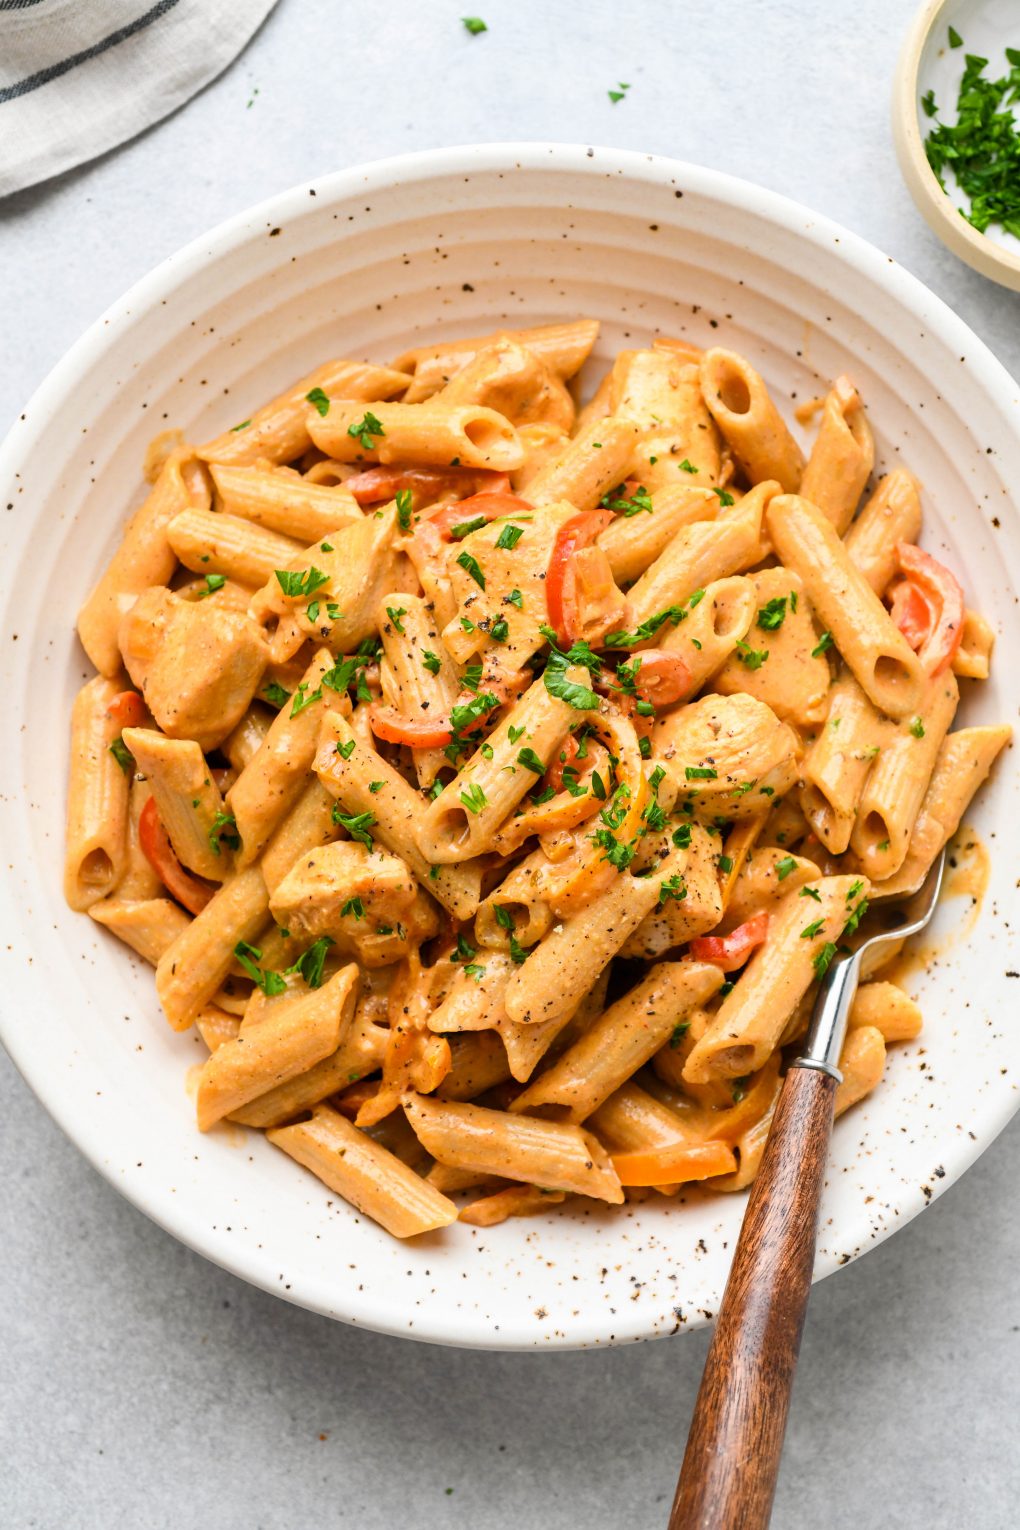 Large speckled shallow bowl filled with creamy cajun chicken penne pasta. Topped with a sprinkle of parsley and a wooden handled fork tucked into the side of the bowl. 